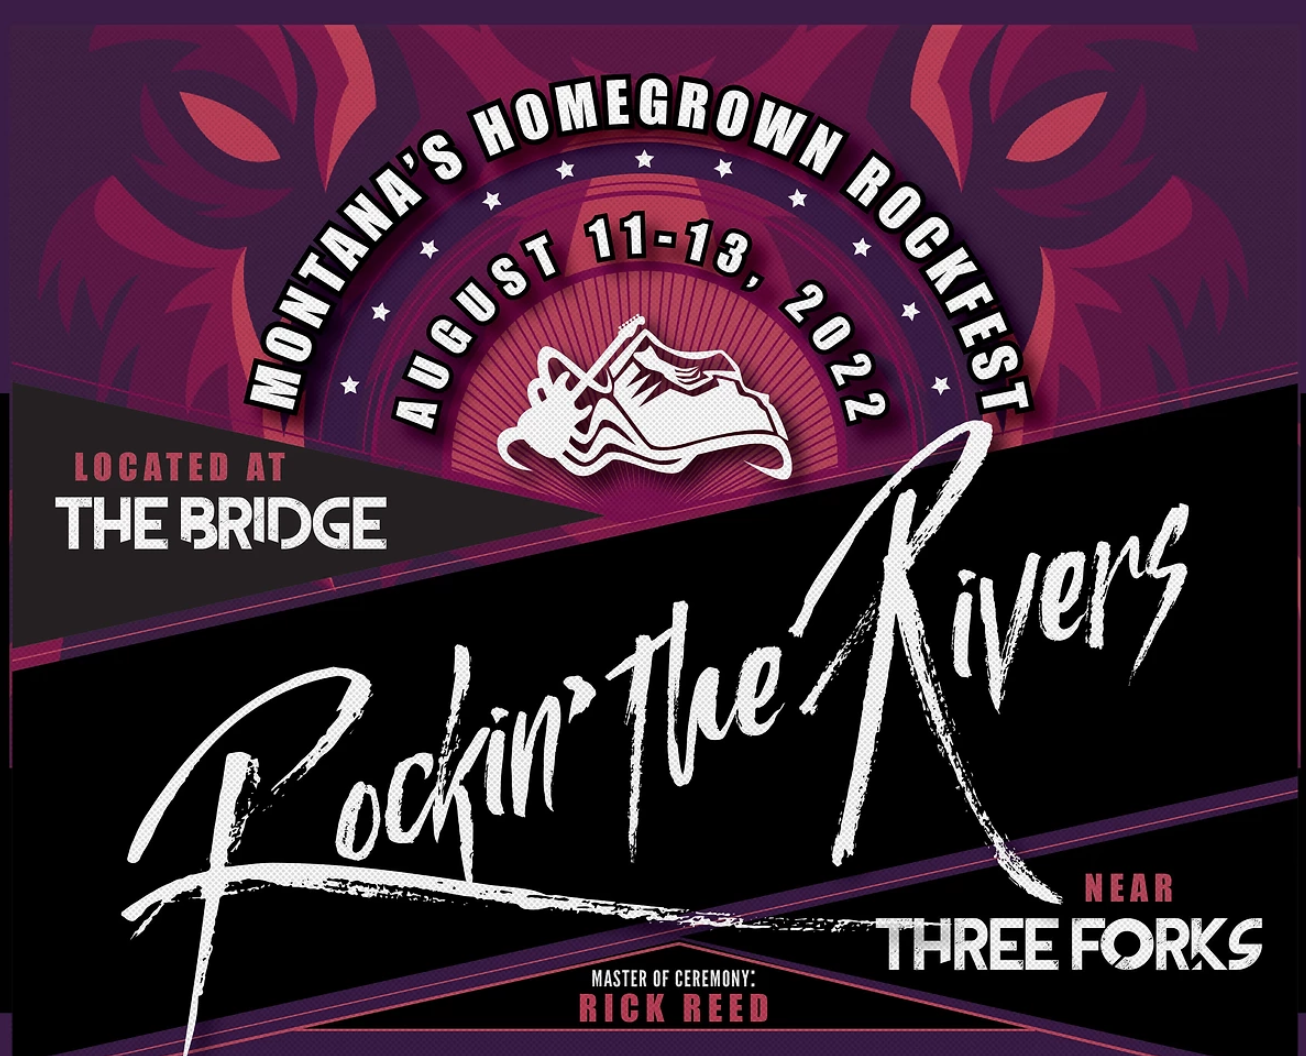 Rockin’ the Rivers announces '22 headliners tix on sale now! The BoZone